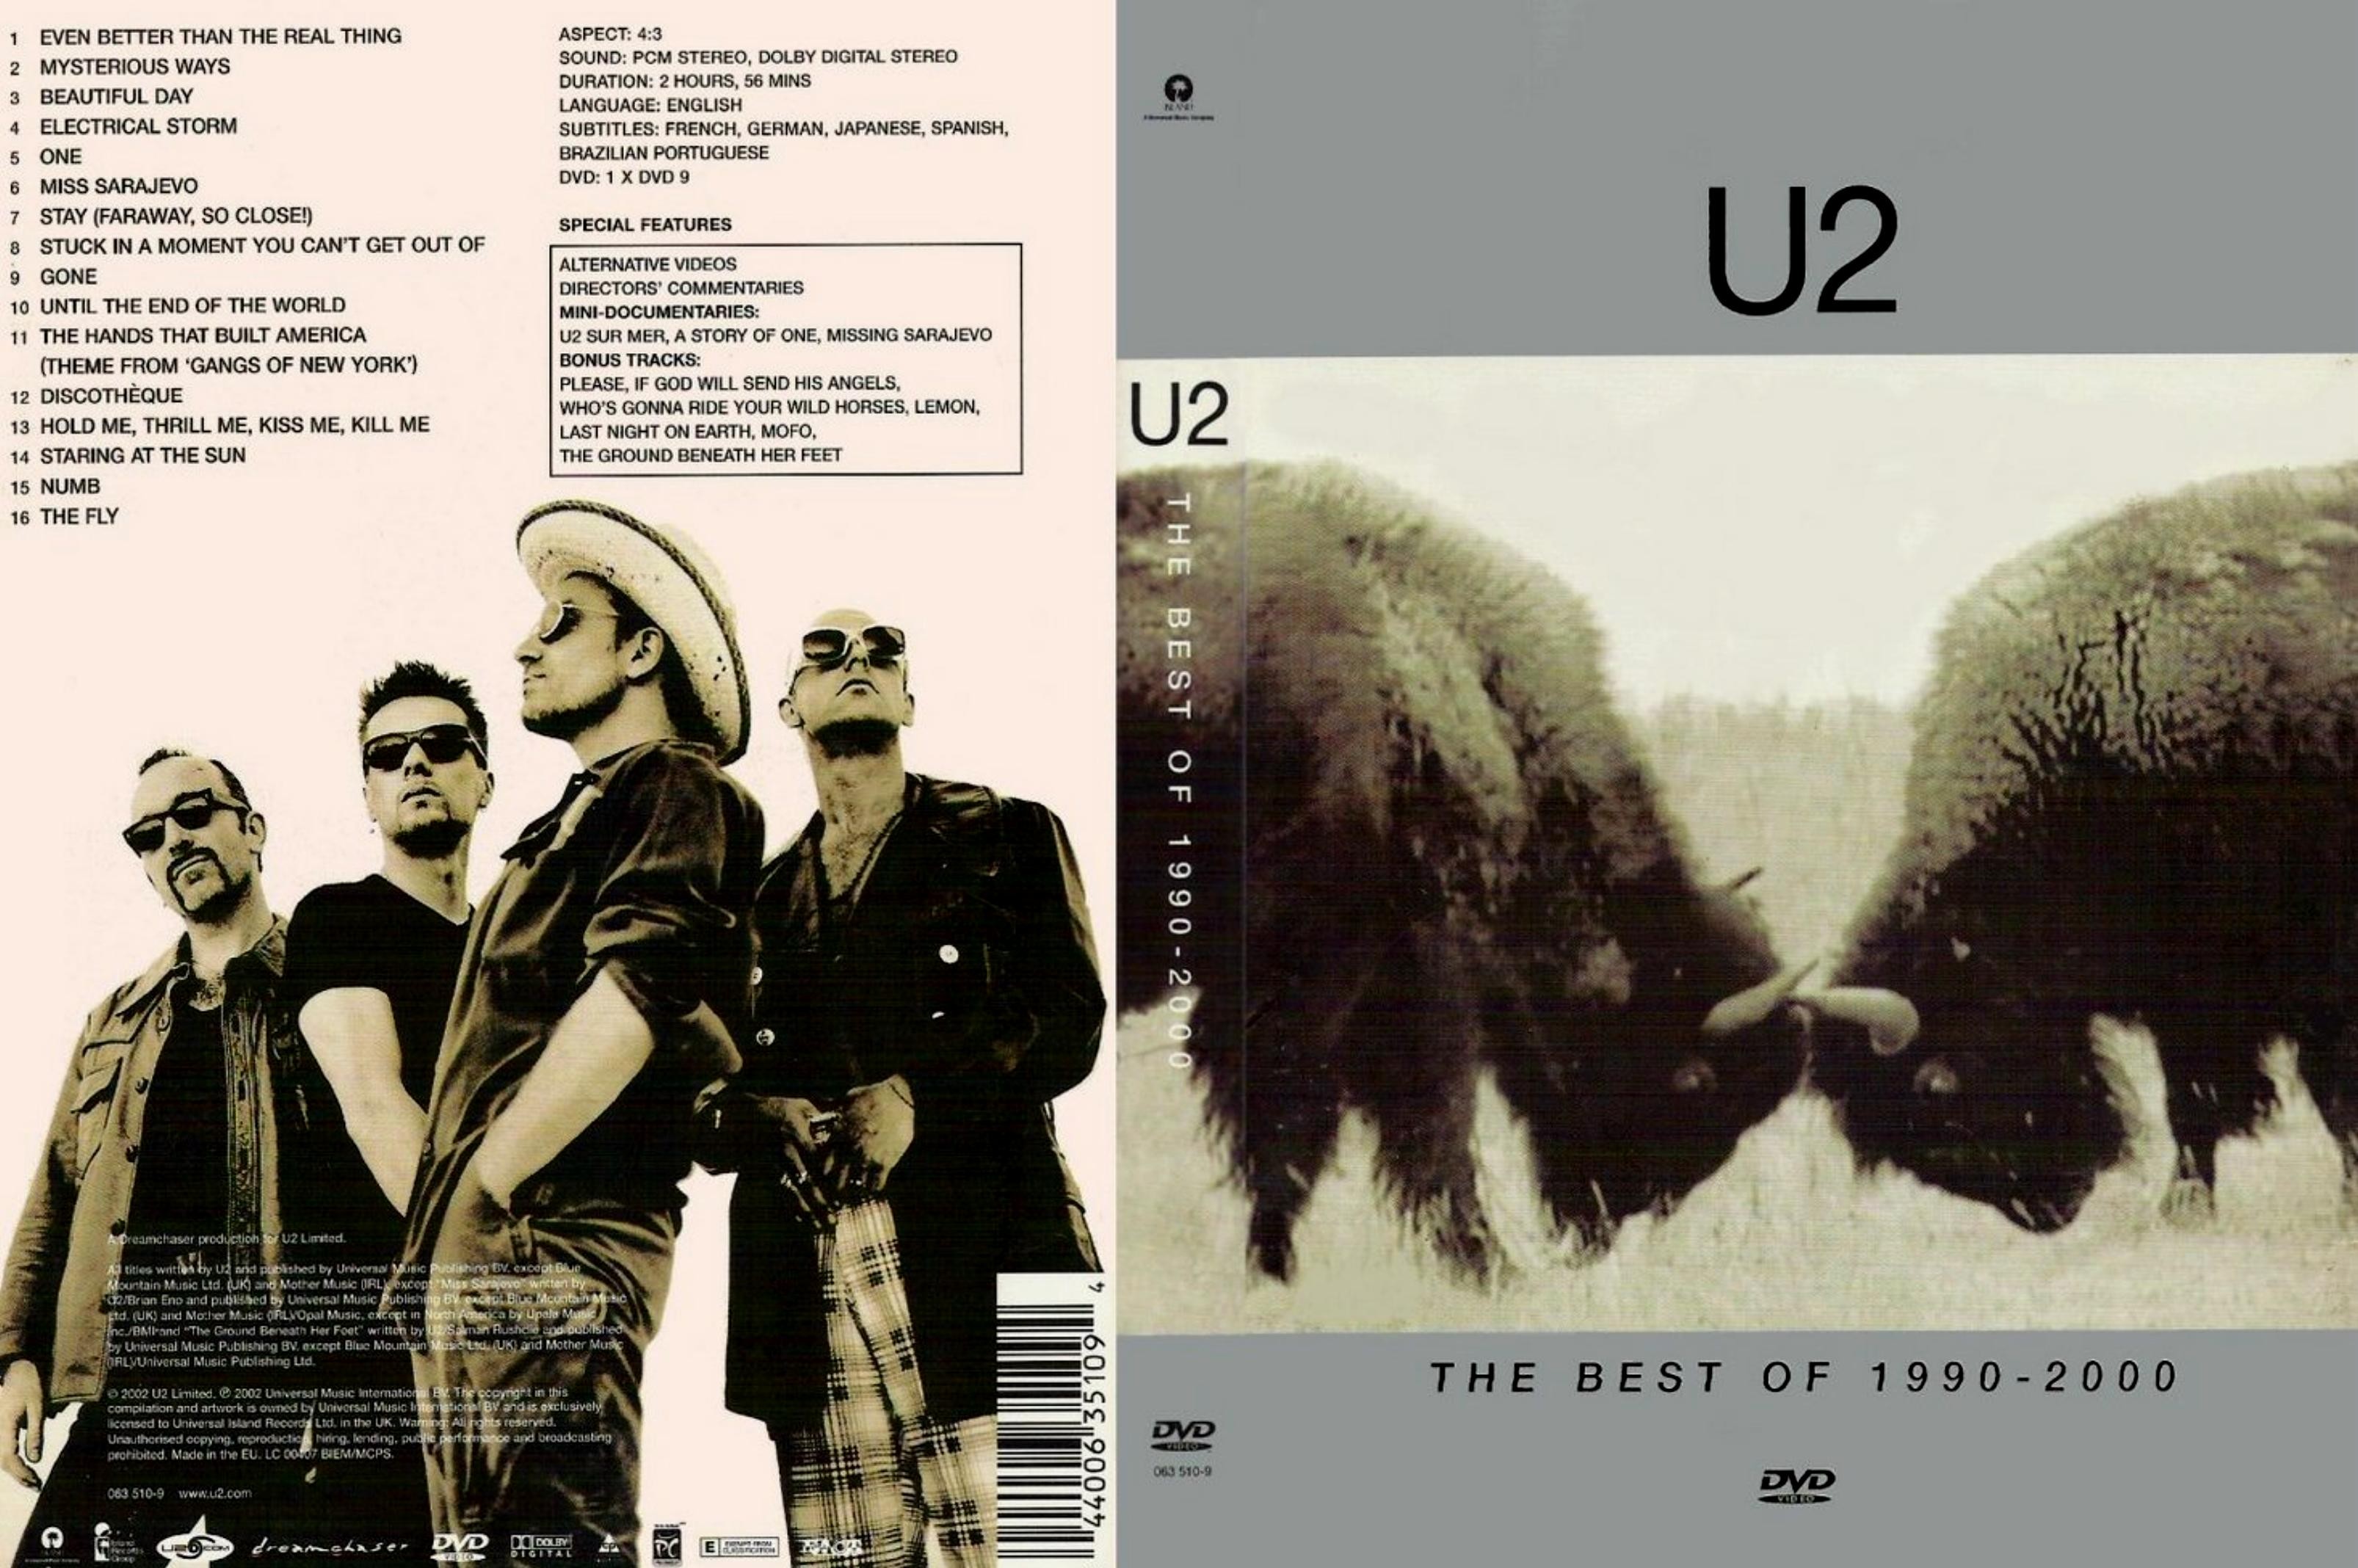 Jaquette DVD U2 The best of 1990-2000